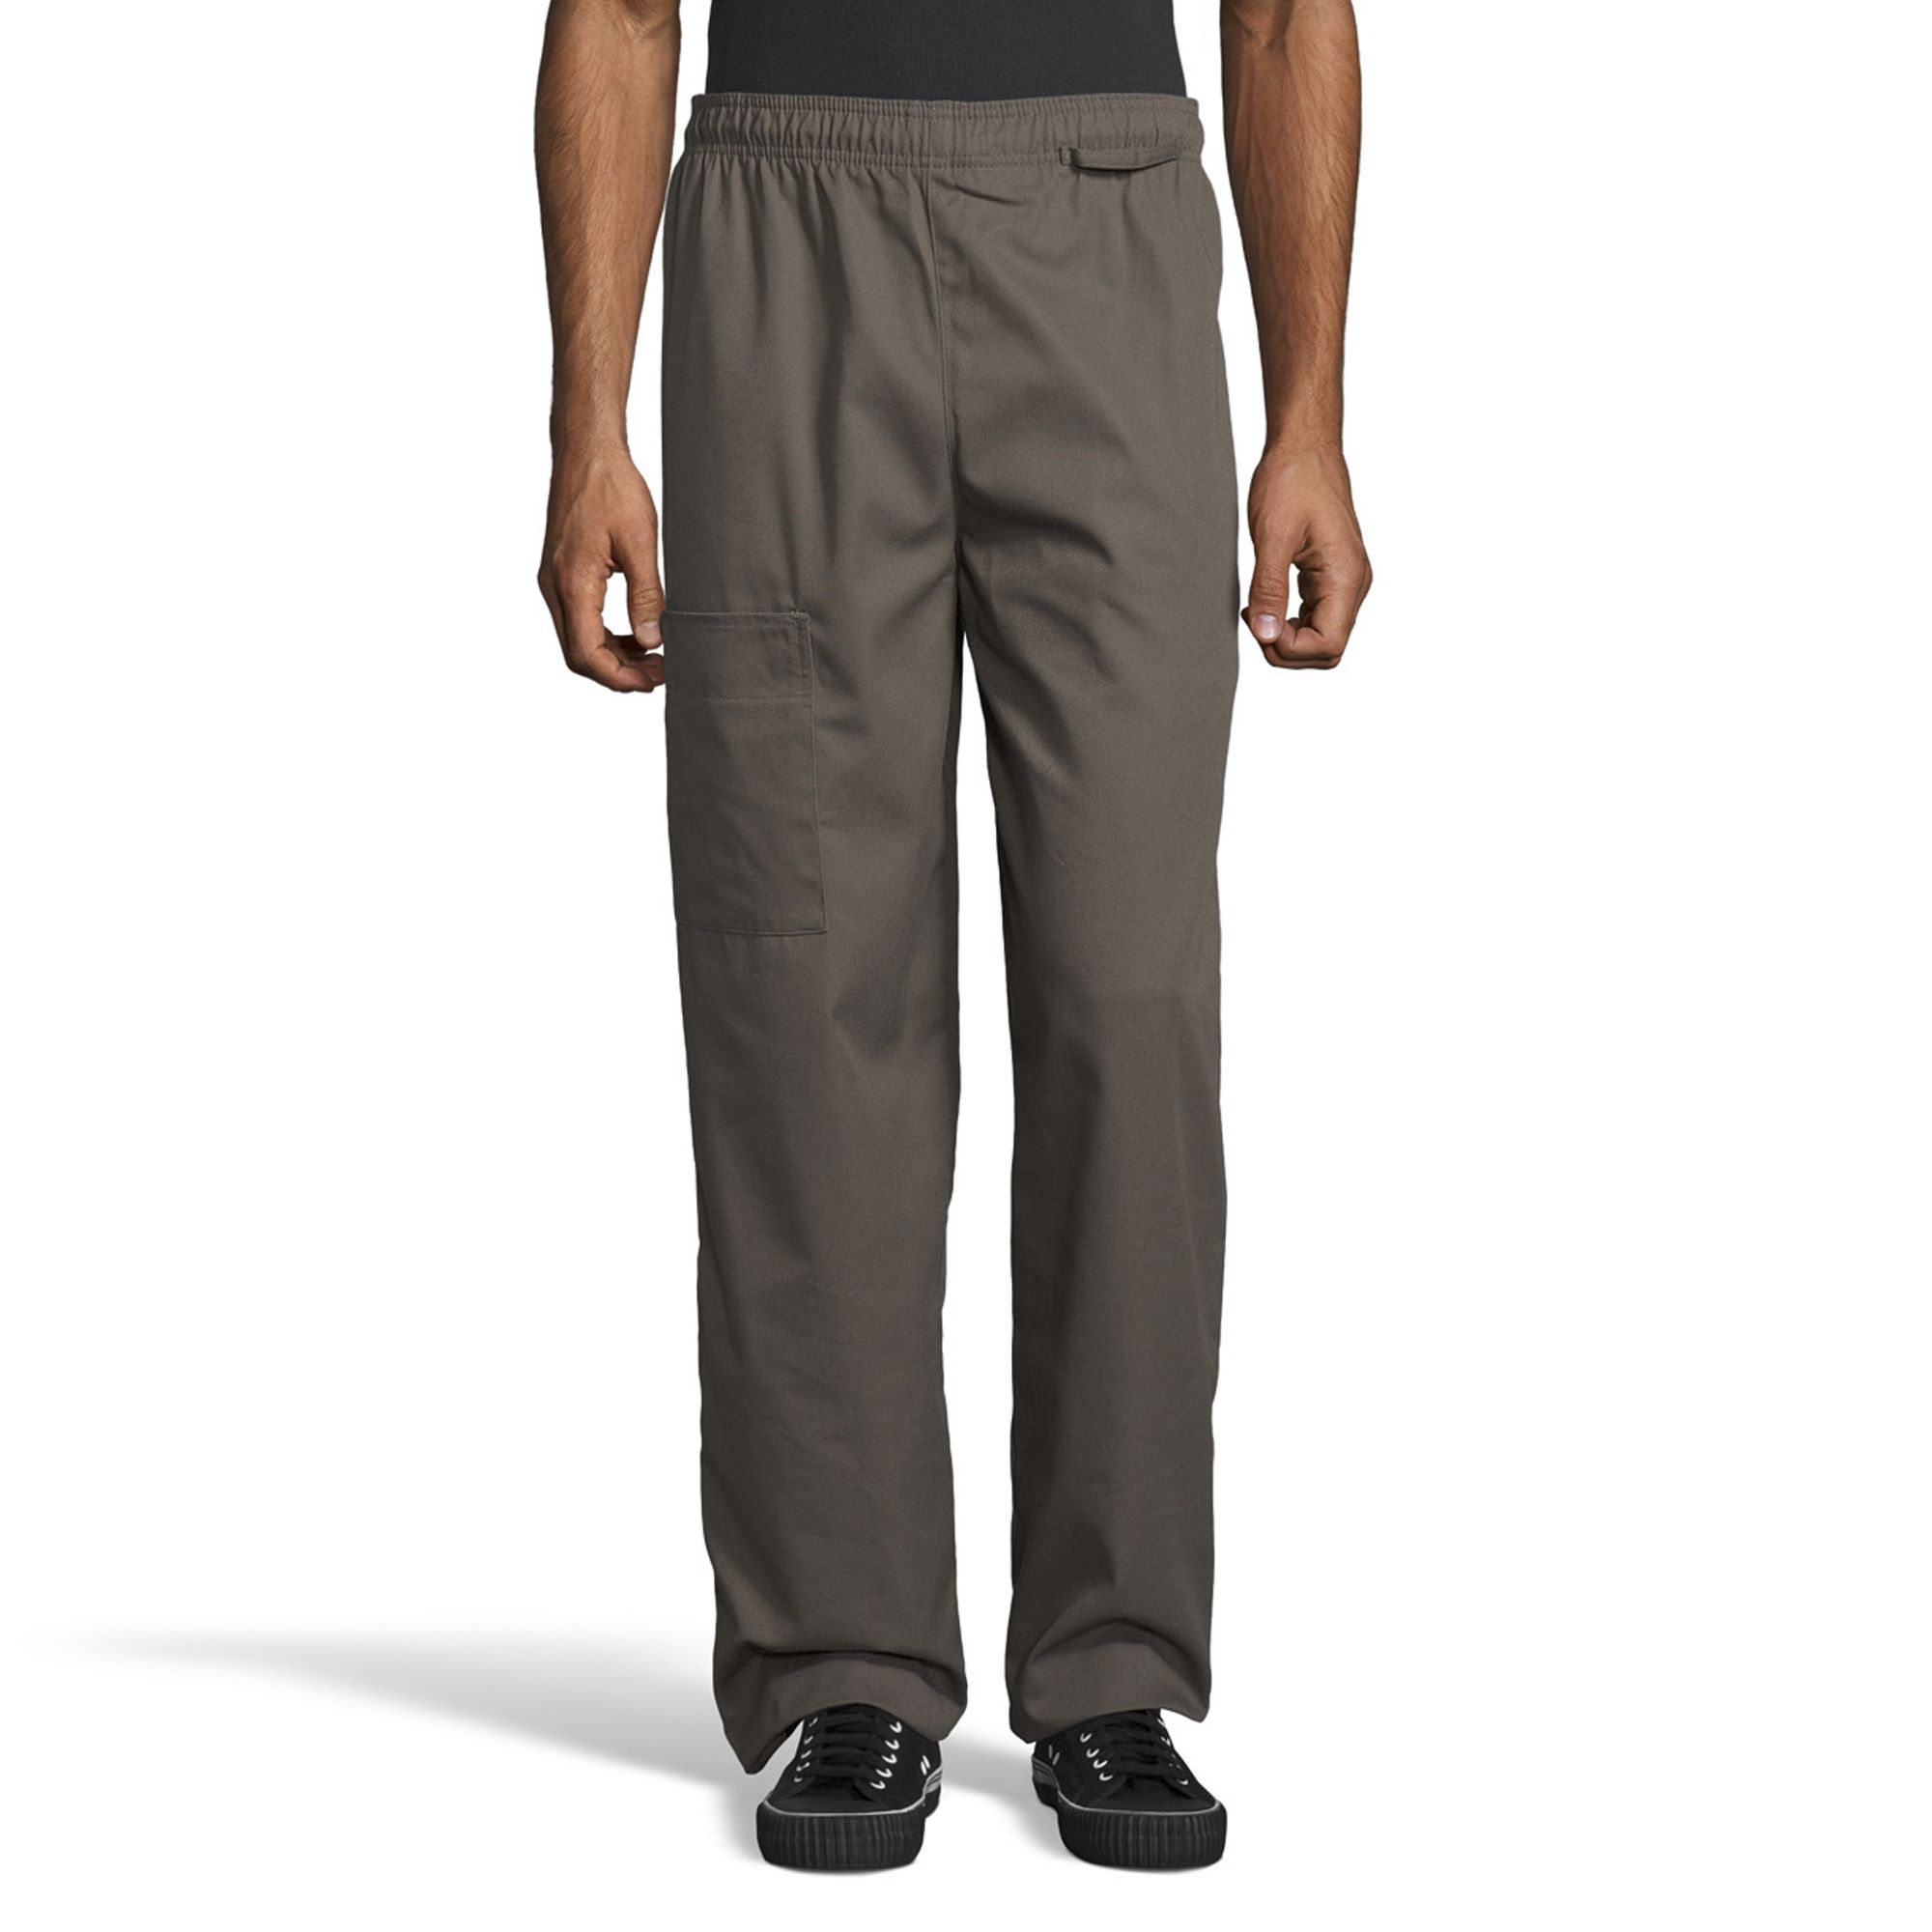 ᐉ ATENE Chef's pants 1156 → Chefs trousers at Top Prices — Stenso.net